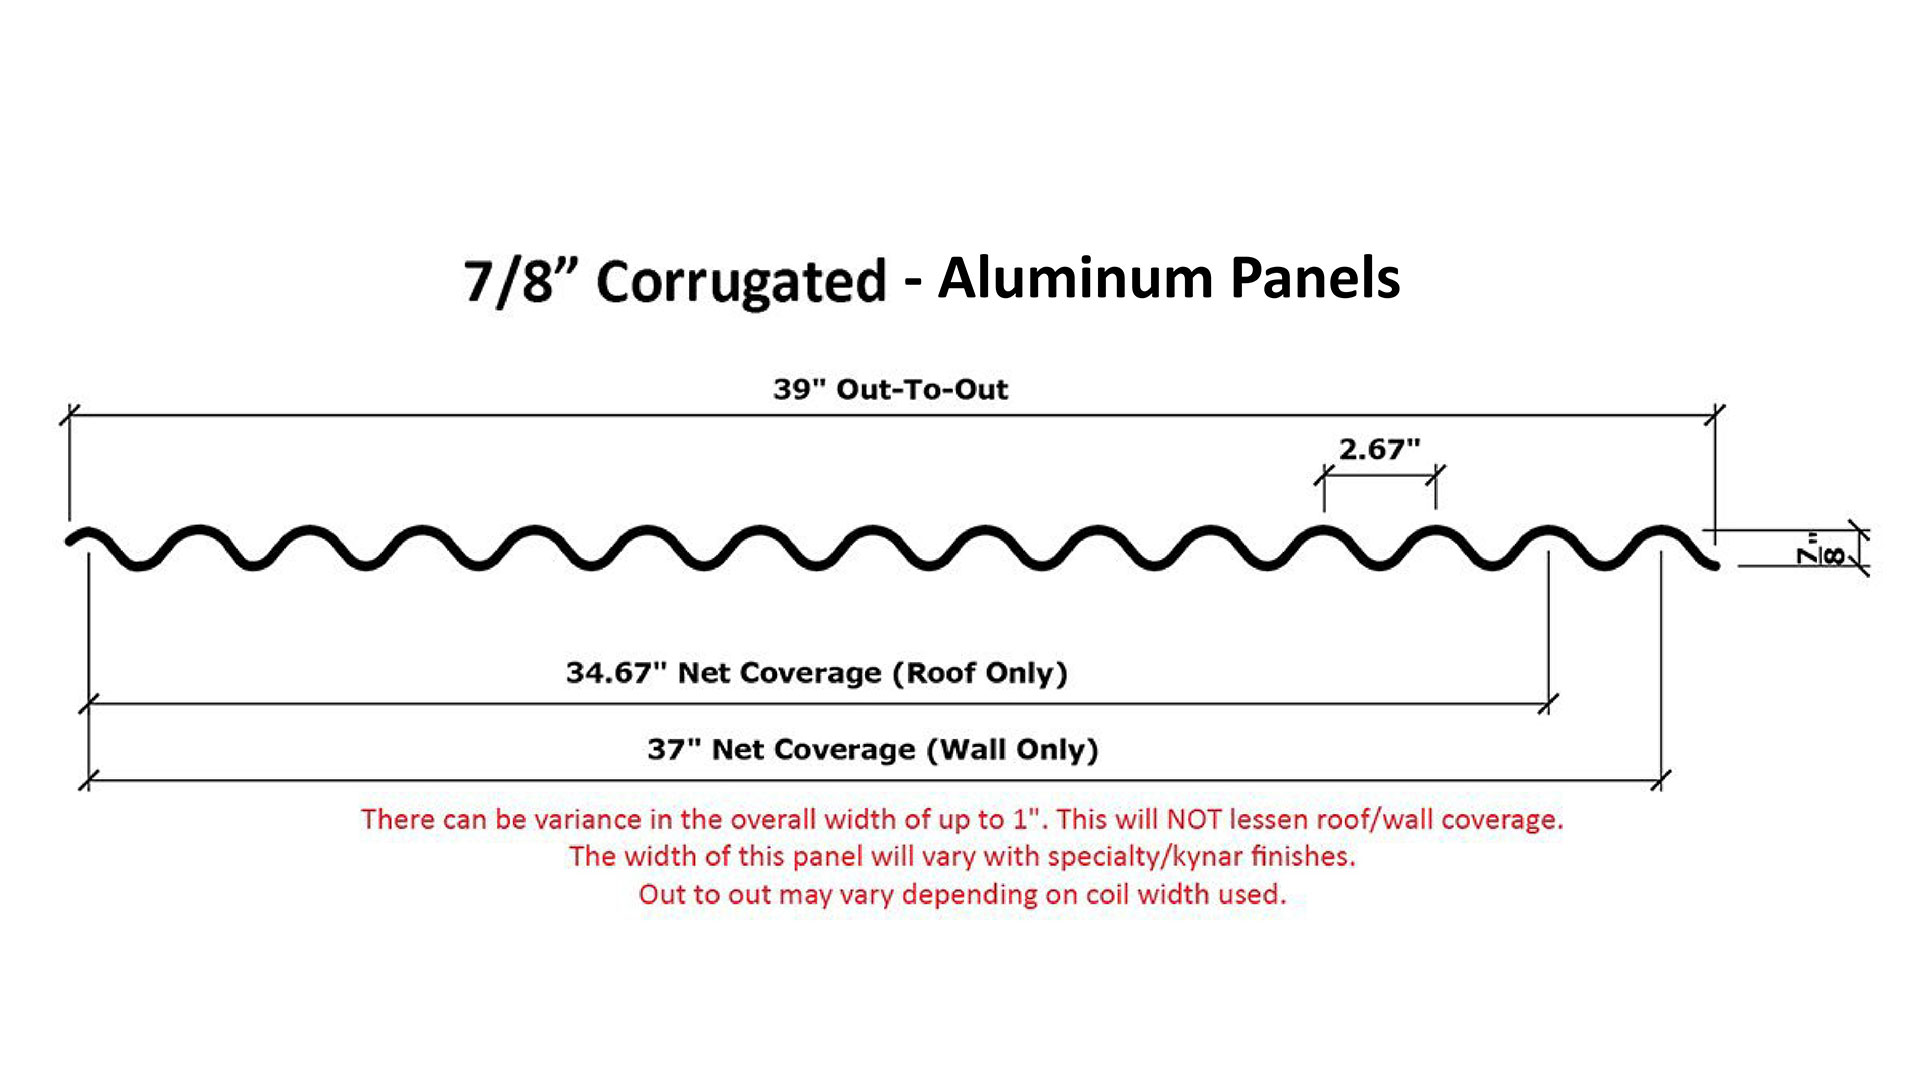 Dimensions for Corrugated Aluminum Roofing Panels